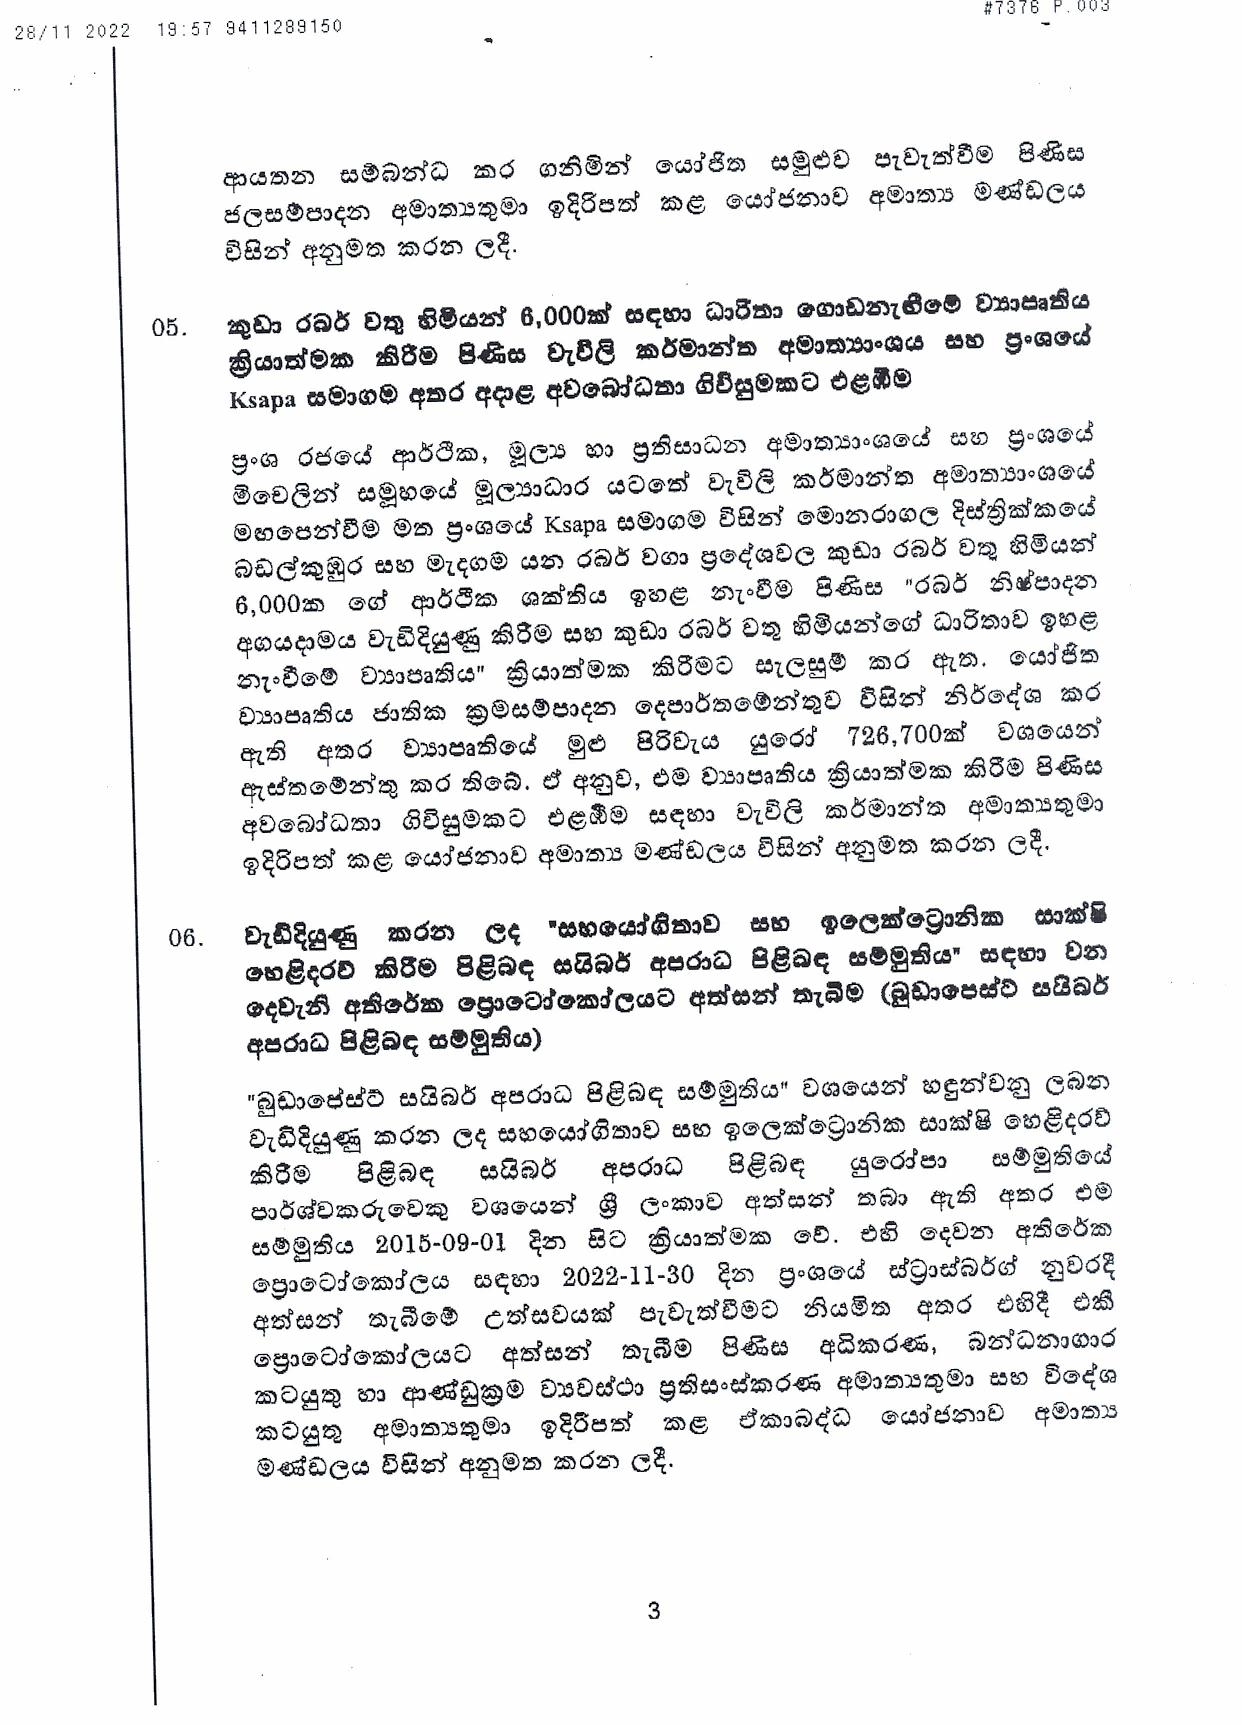 Cabinet Decision on 28.11.2022 page 003